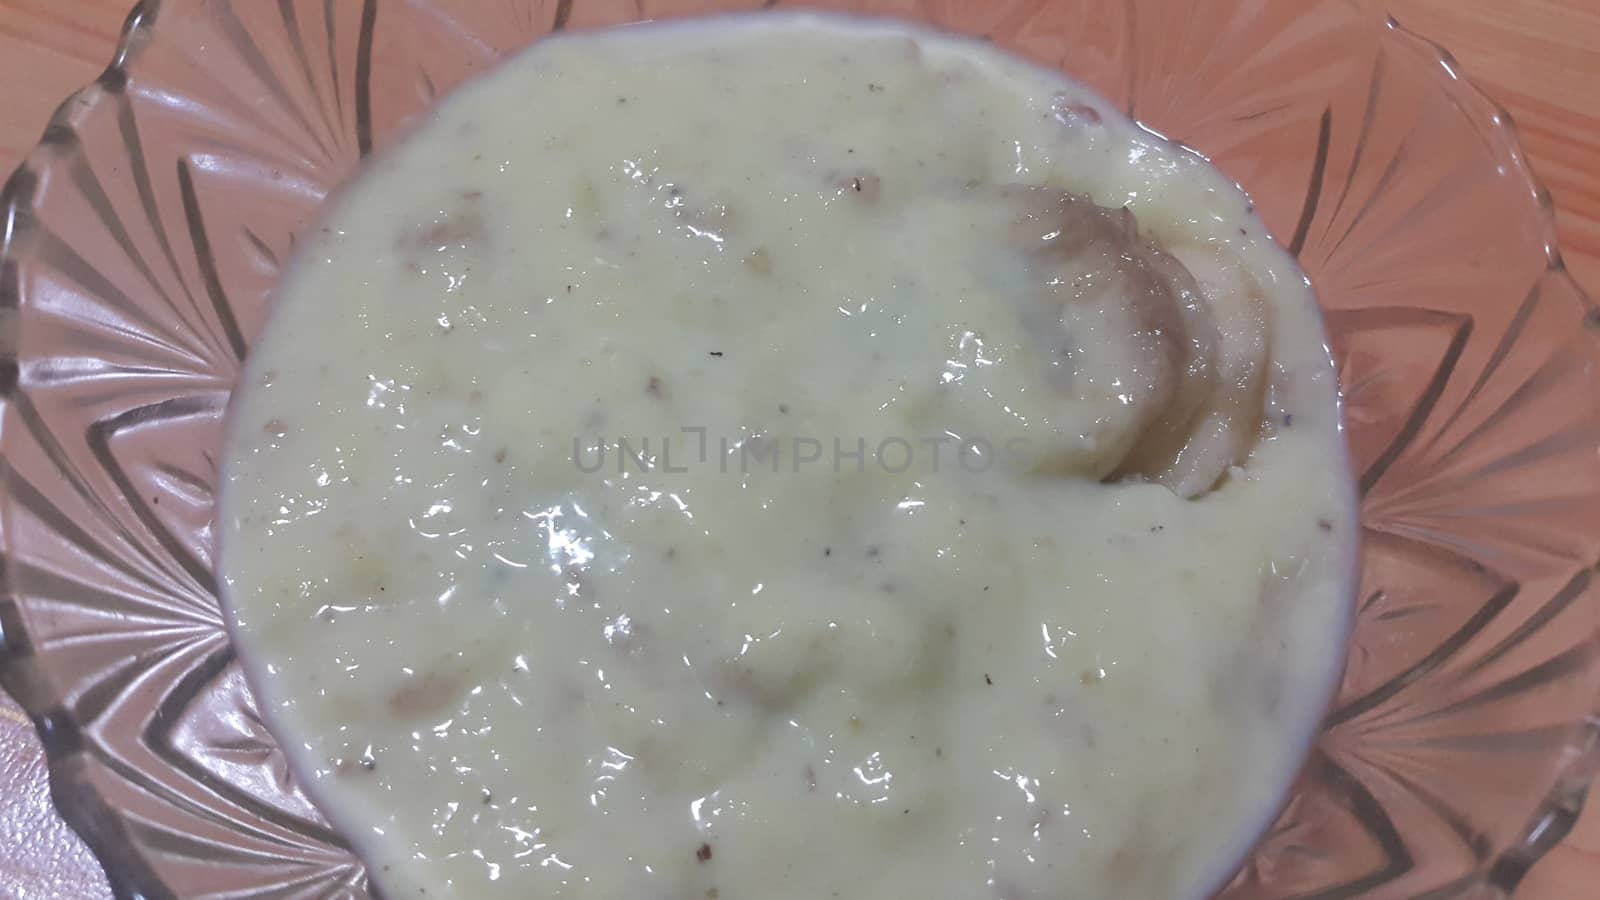 Creamy tasty sweet white rice pudding or Kheer in a glass bowl with banana slices layered on surface. A top view of home made pudding, a dairy products for dessert after meal.